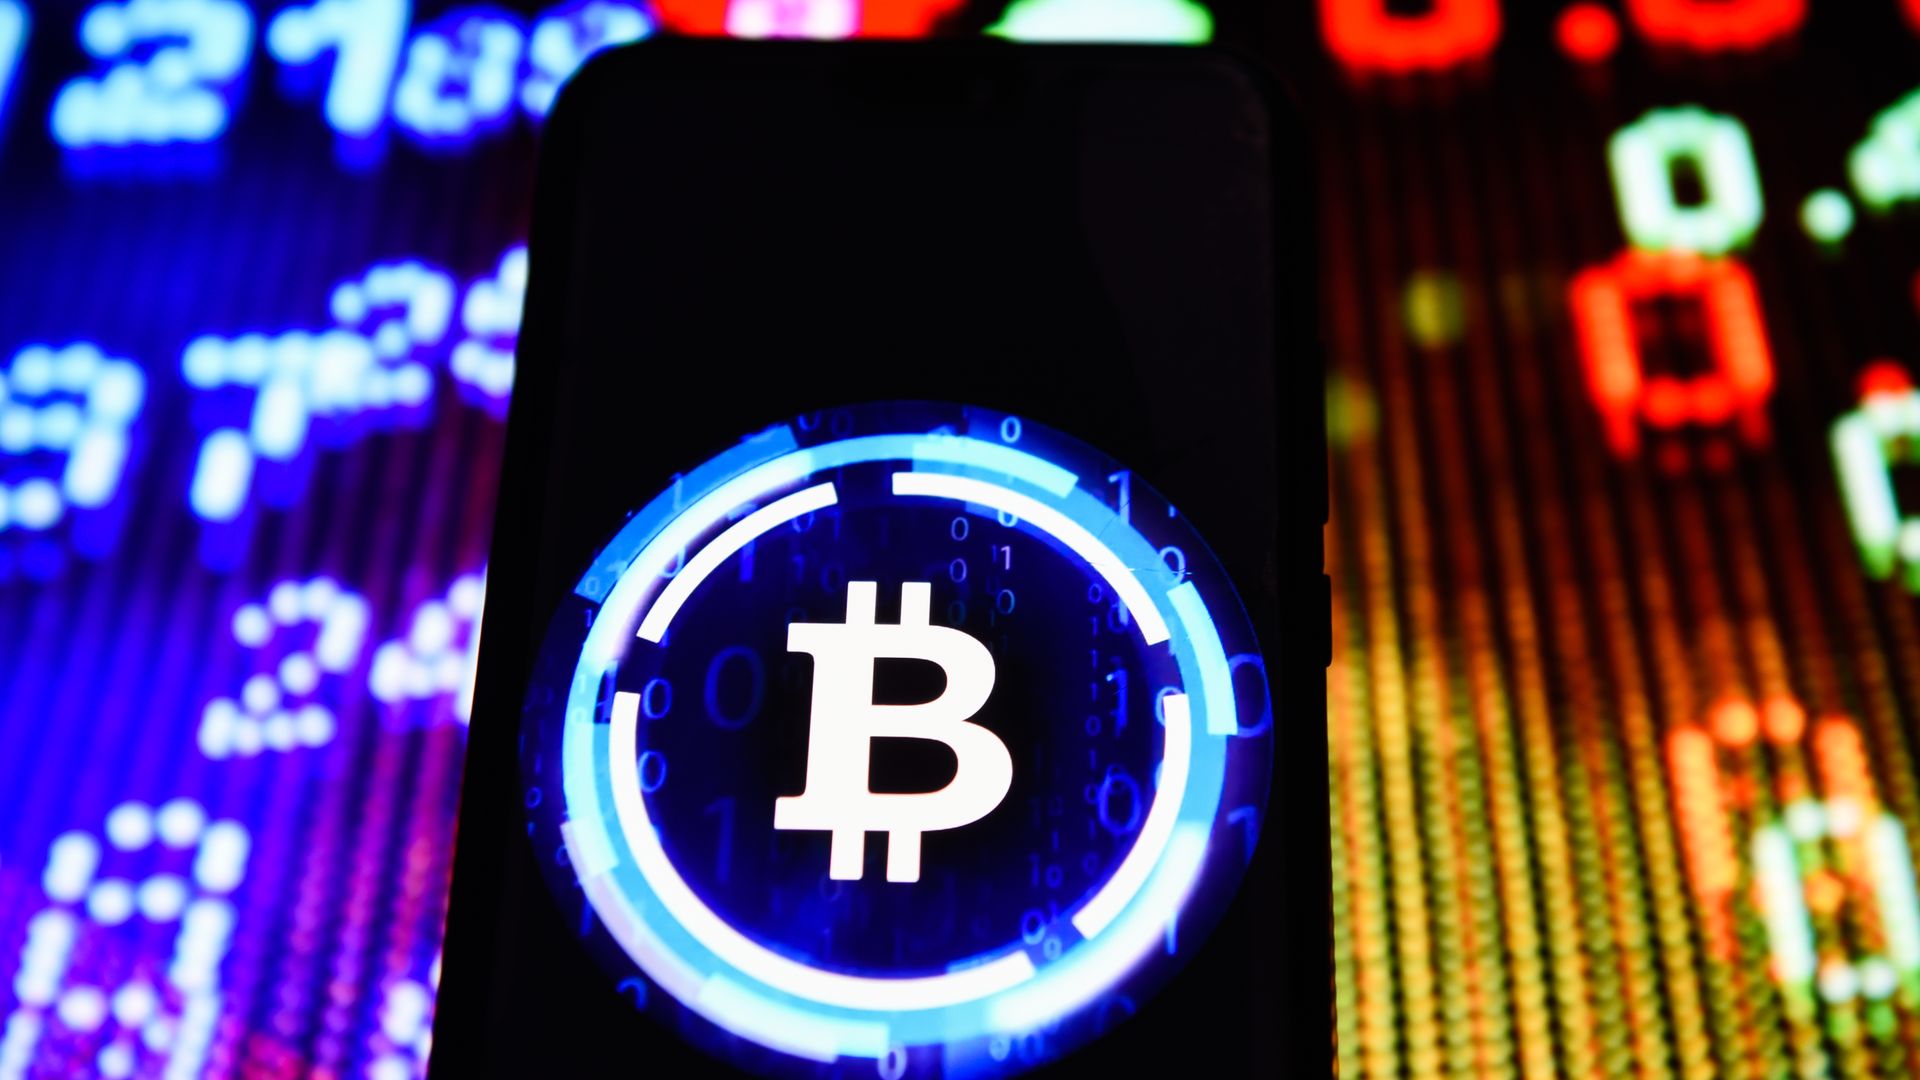 In this image, the neon blue and white Bitcoin logo is highlighted on a black phone screen in front of a bright colored background of numbers.